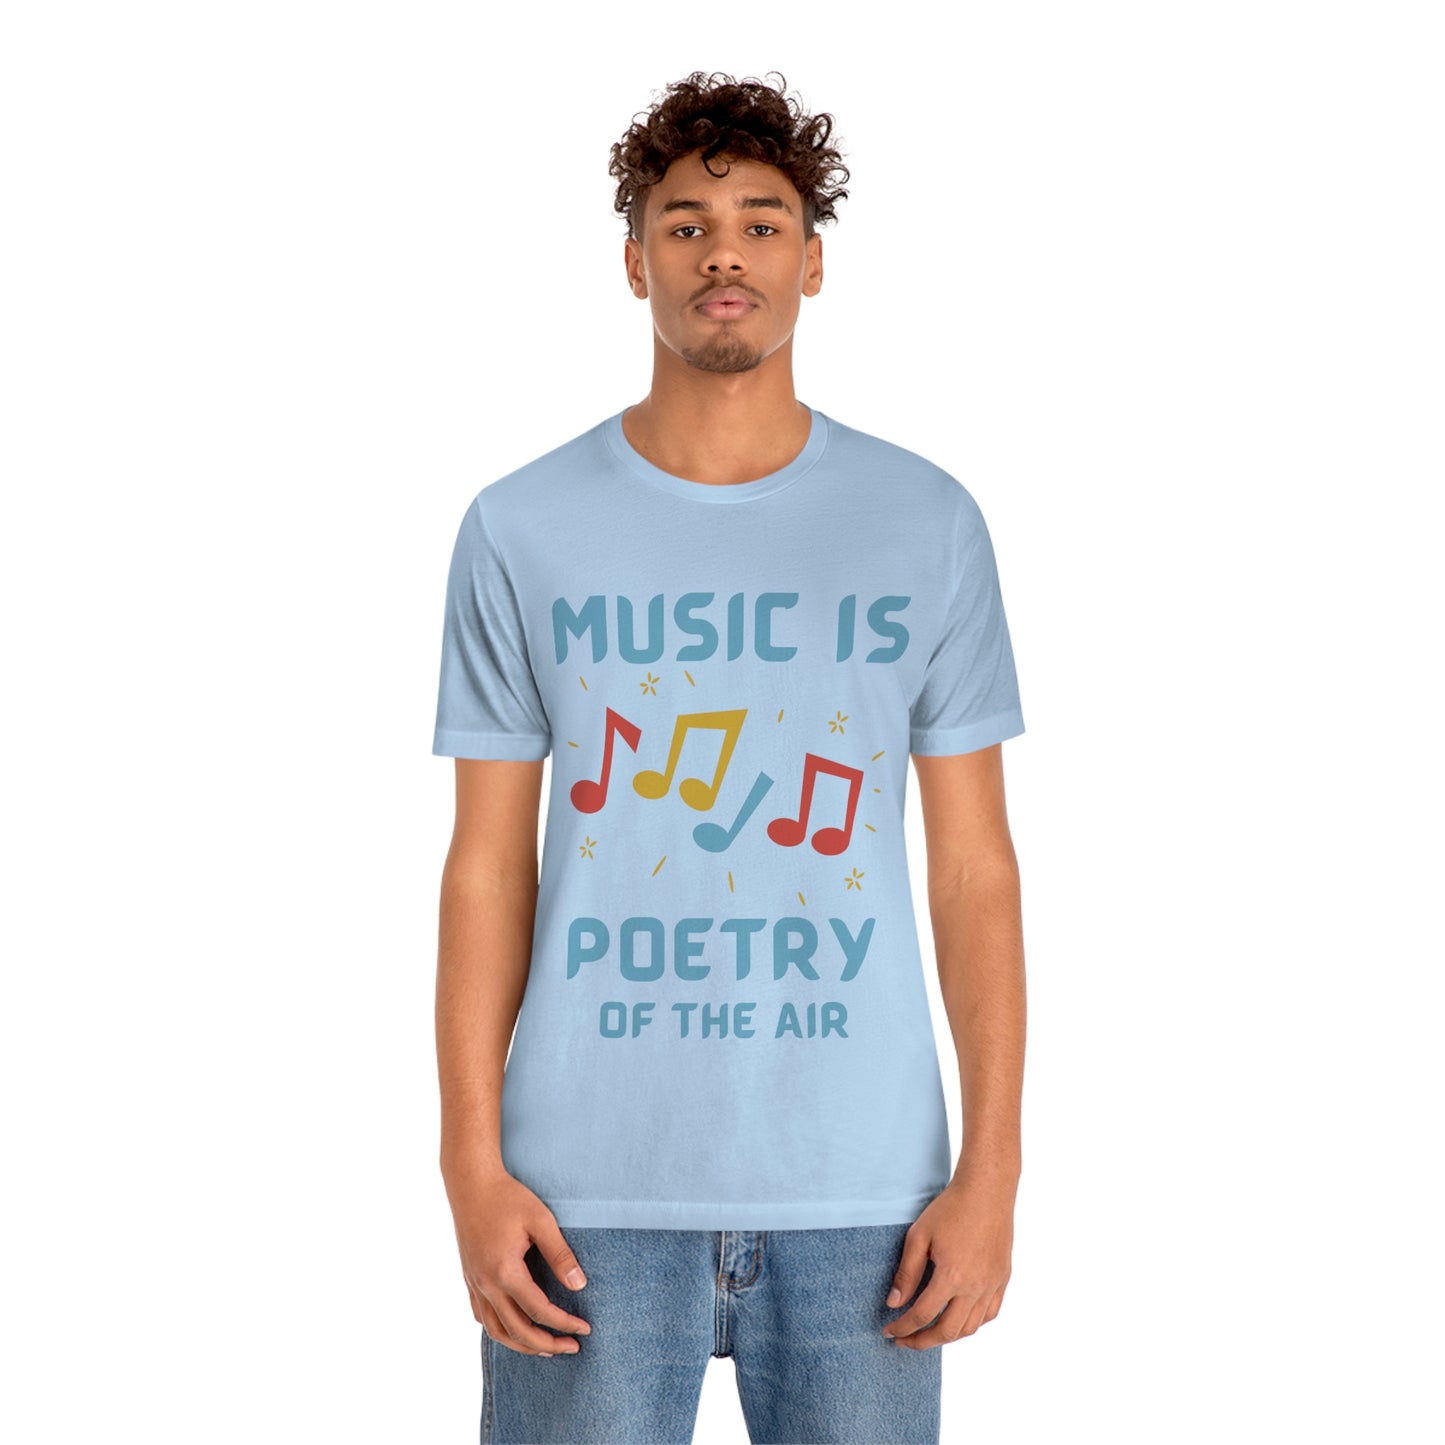 Music is Poetry of the Air